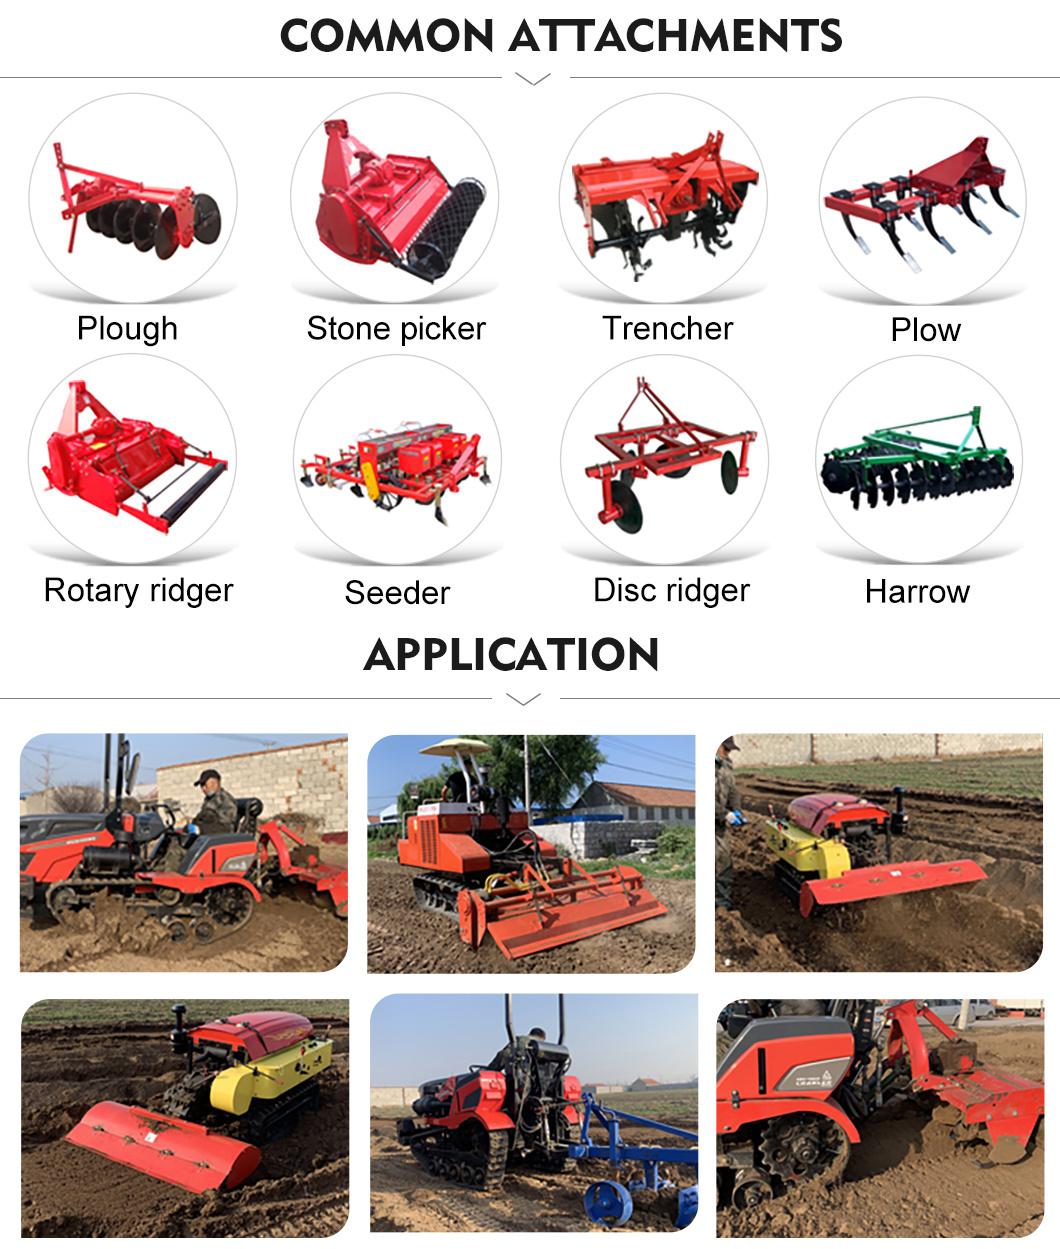 Low Fuel Consumption Forest Mini Crawler Tractor Manual Cultivator with Track for Agriculture